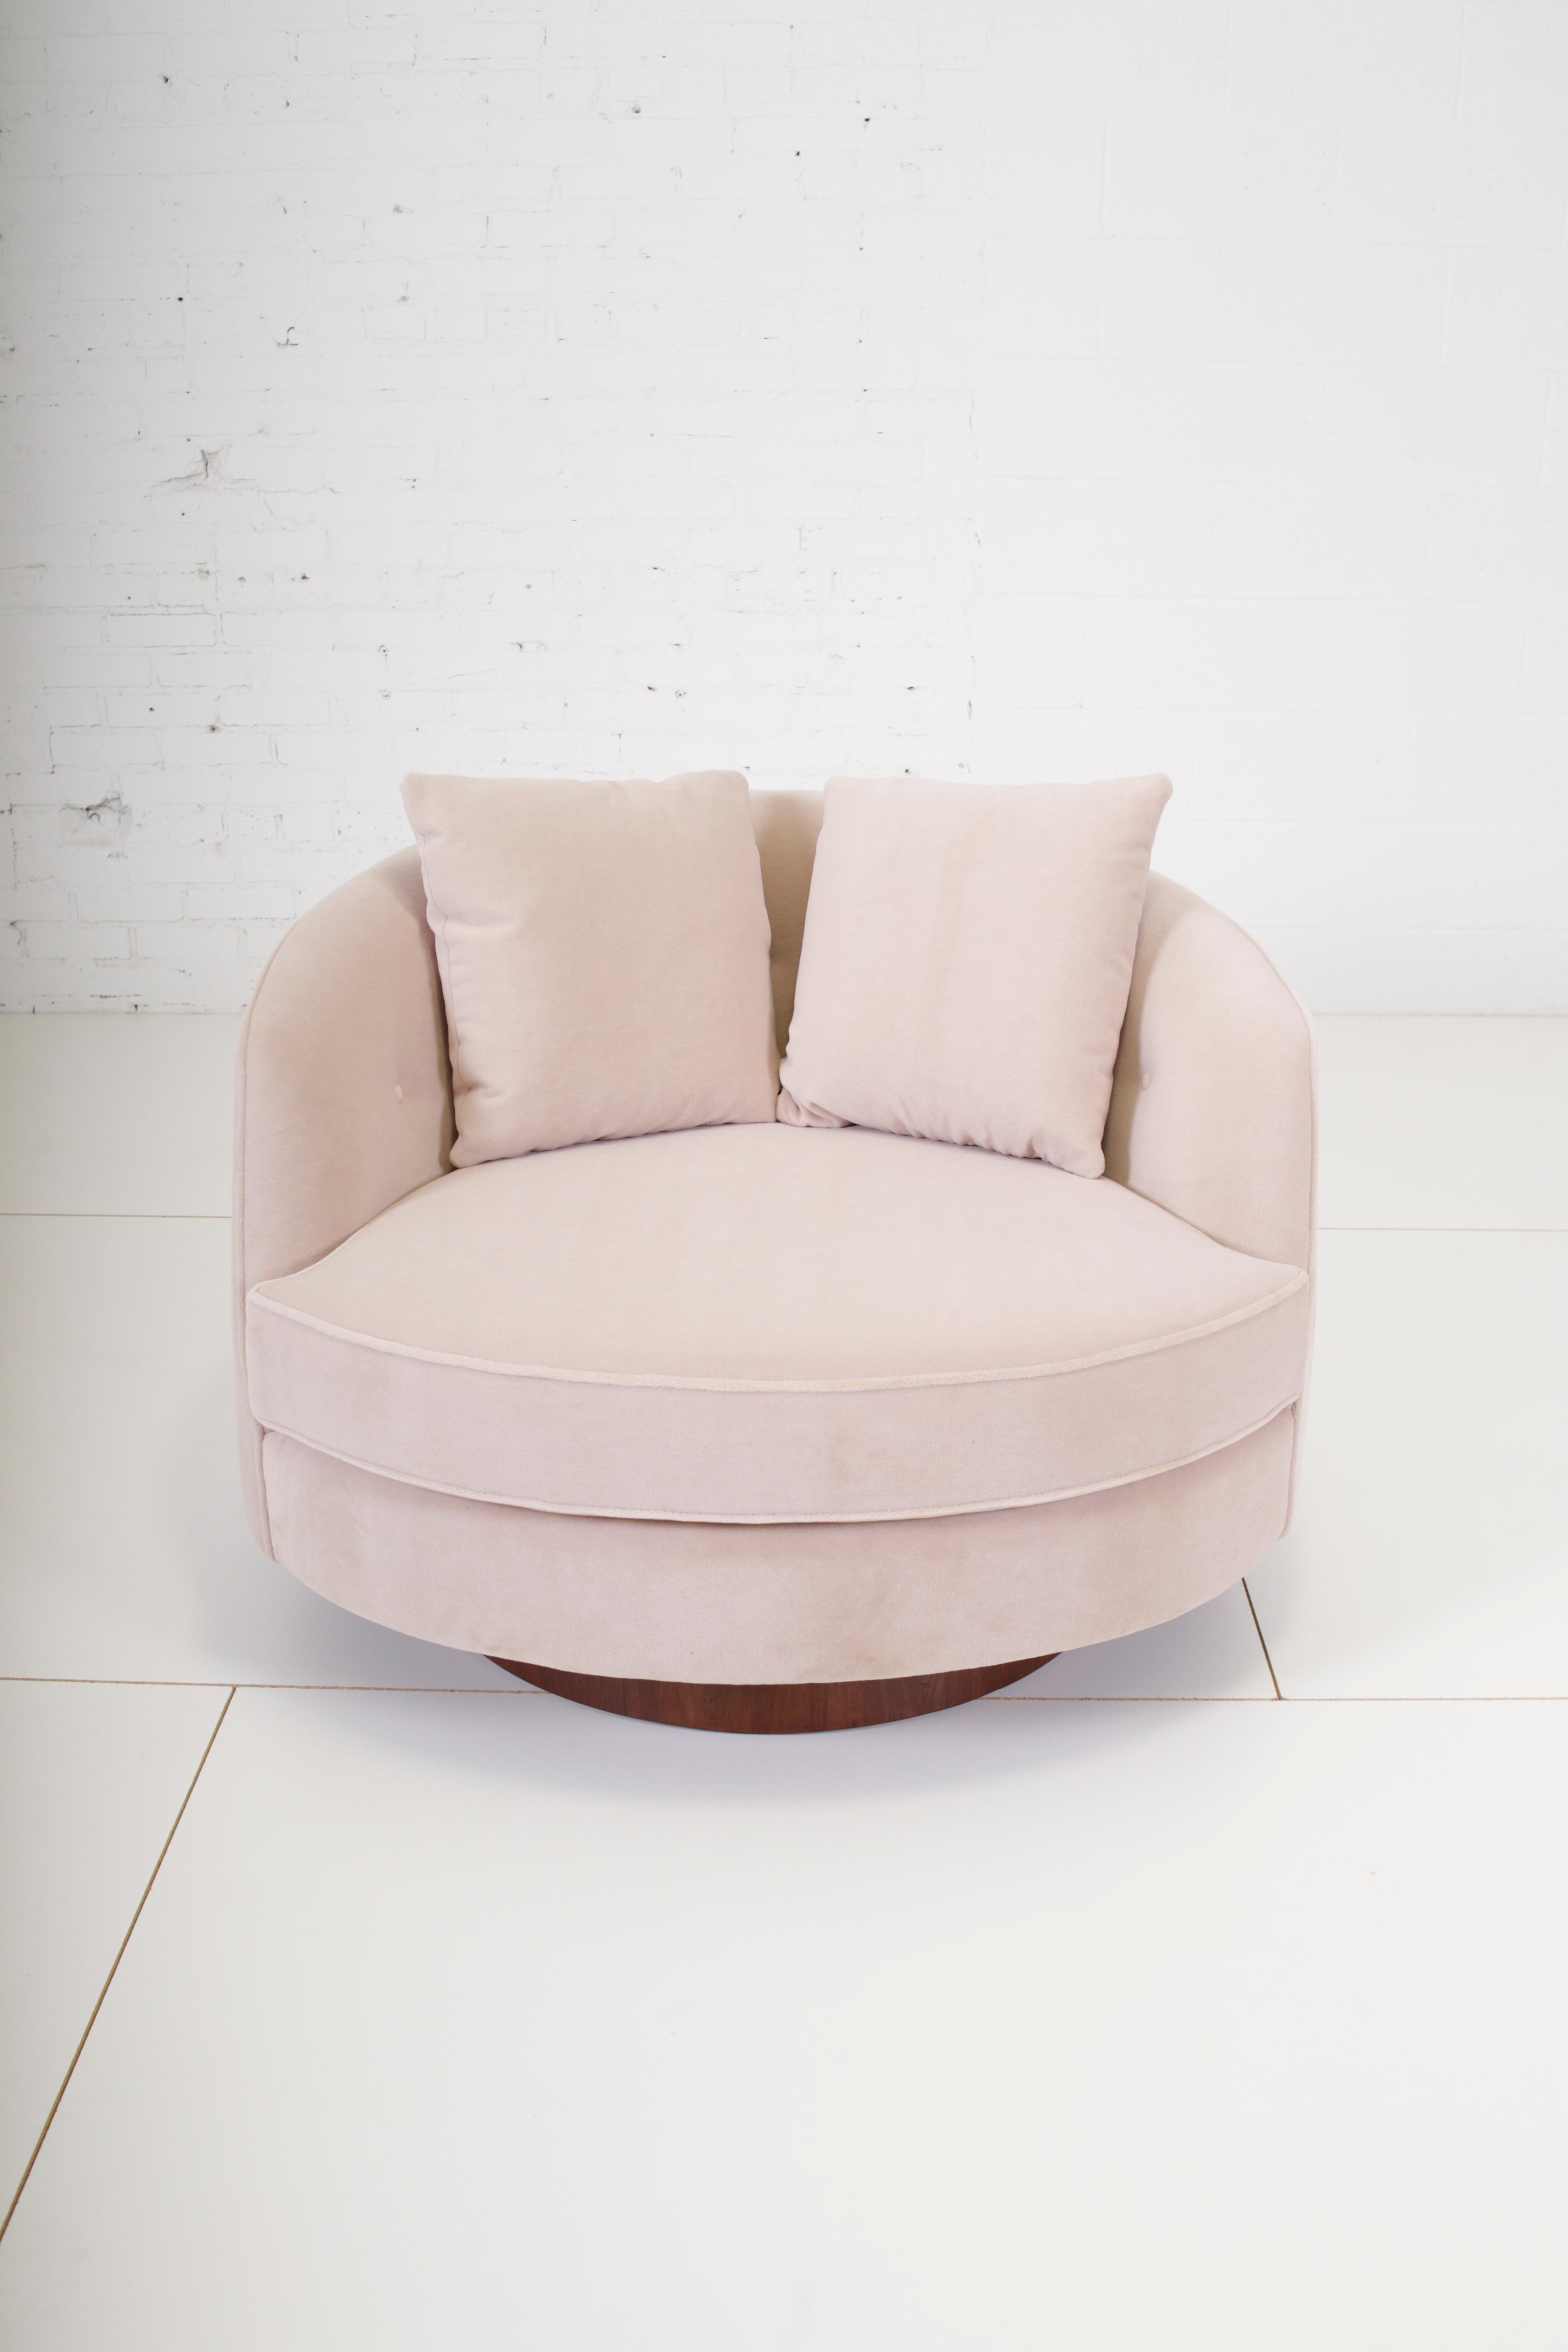 Oversize swivel chair by Milo Baughman for Thayer-Coggin. Fully restored. New mohair upholstery in dusty pink tone with walnut swivel base.